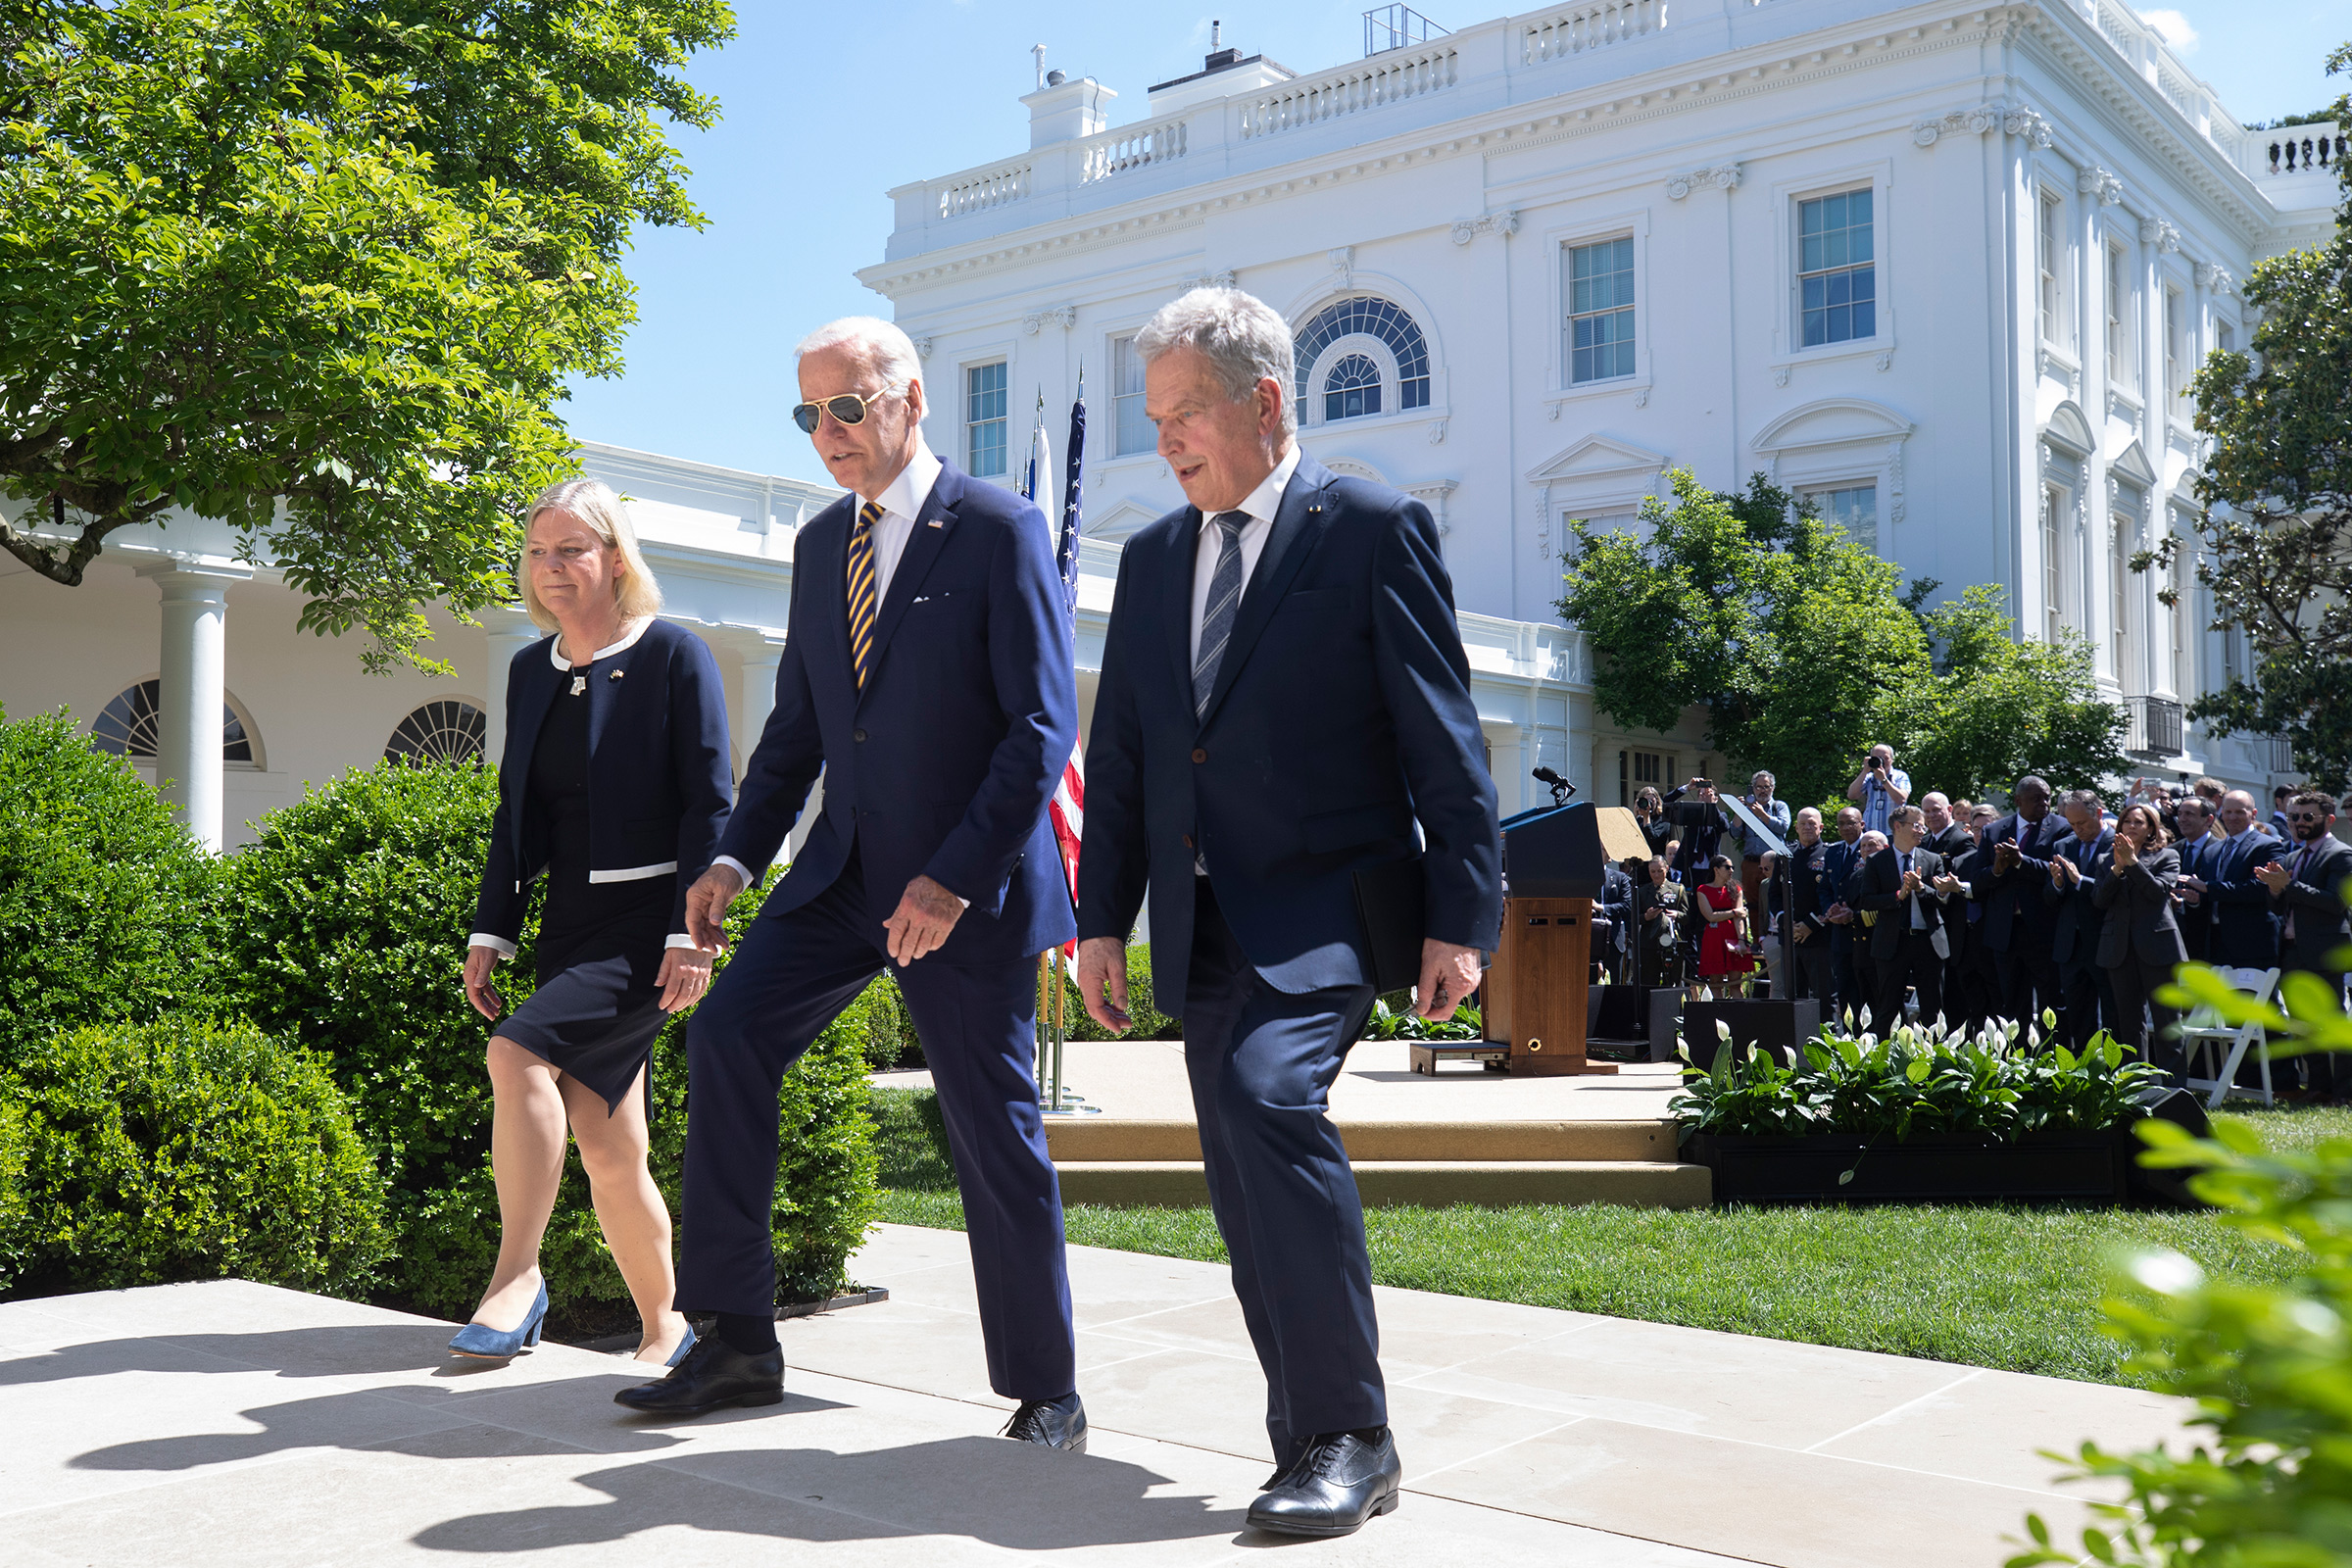 U.S. President Joe Biden (C), Prime Minister Magdalena Andersson of Sweden(L), and President Sauli Niinisto of Finland(R) depart after speaking to the media following their meeting on Finland's and Sweden's NATO applications in the Rose Garden of the White House, May 19, 2022. (Oliver Contreras—CNP/Polaris)